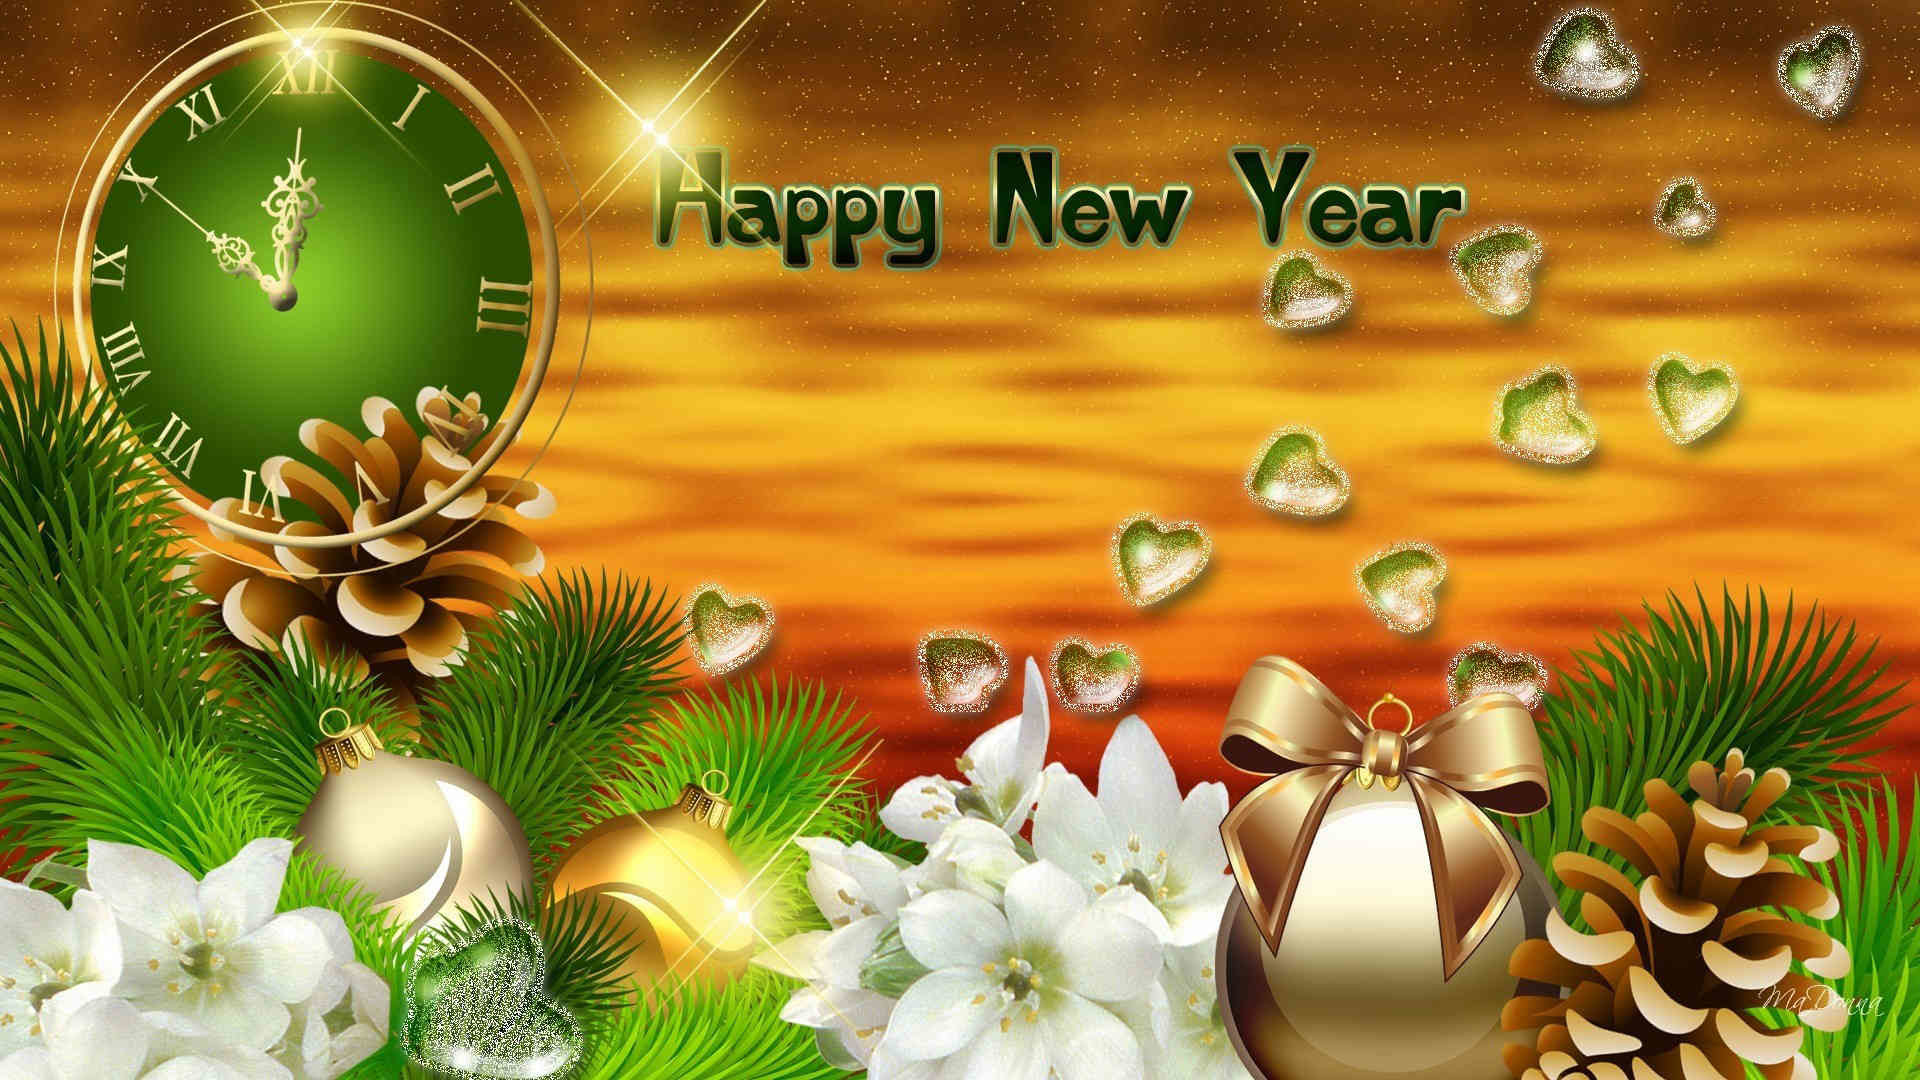 1920x1080 Happy New Year 2018 Wishes on Cards & Wallpaper